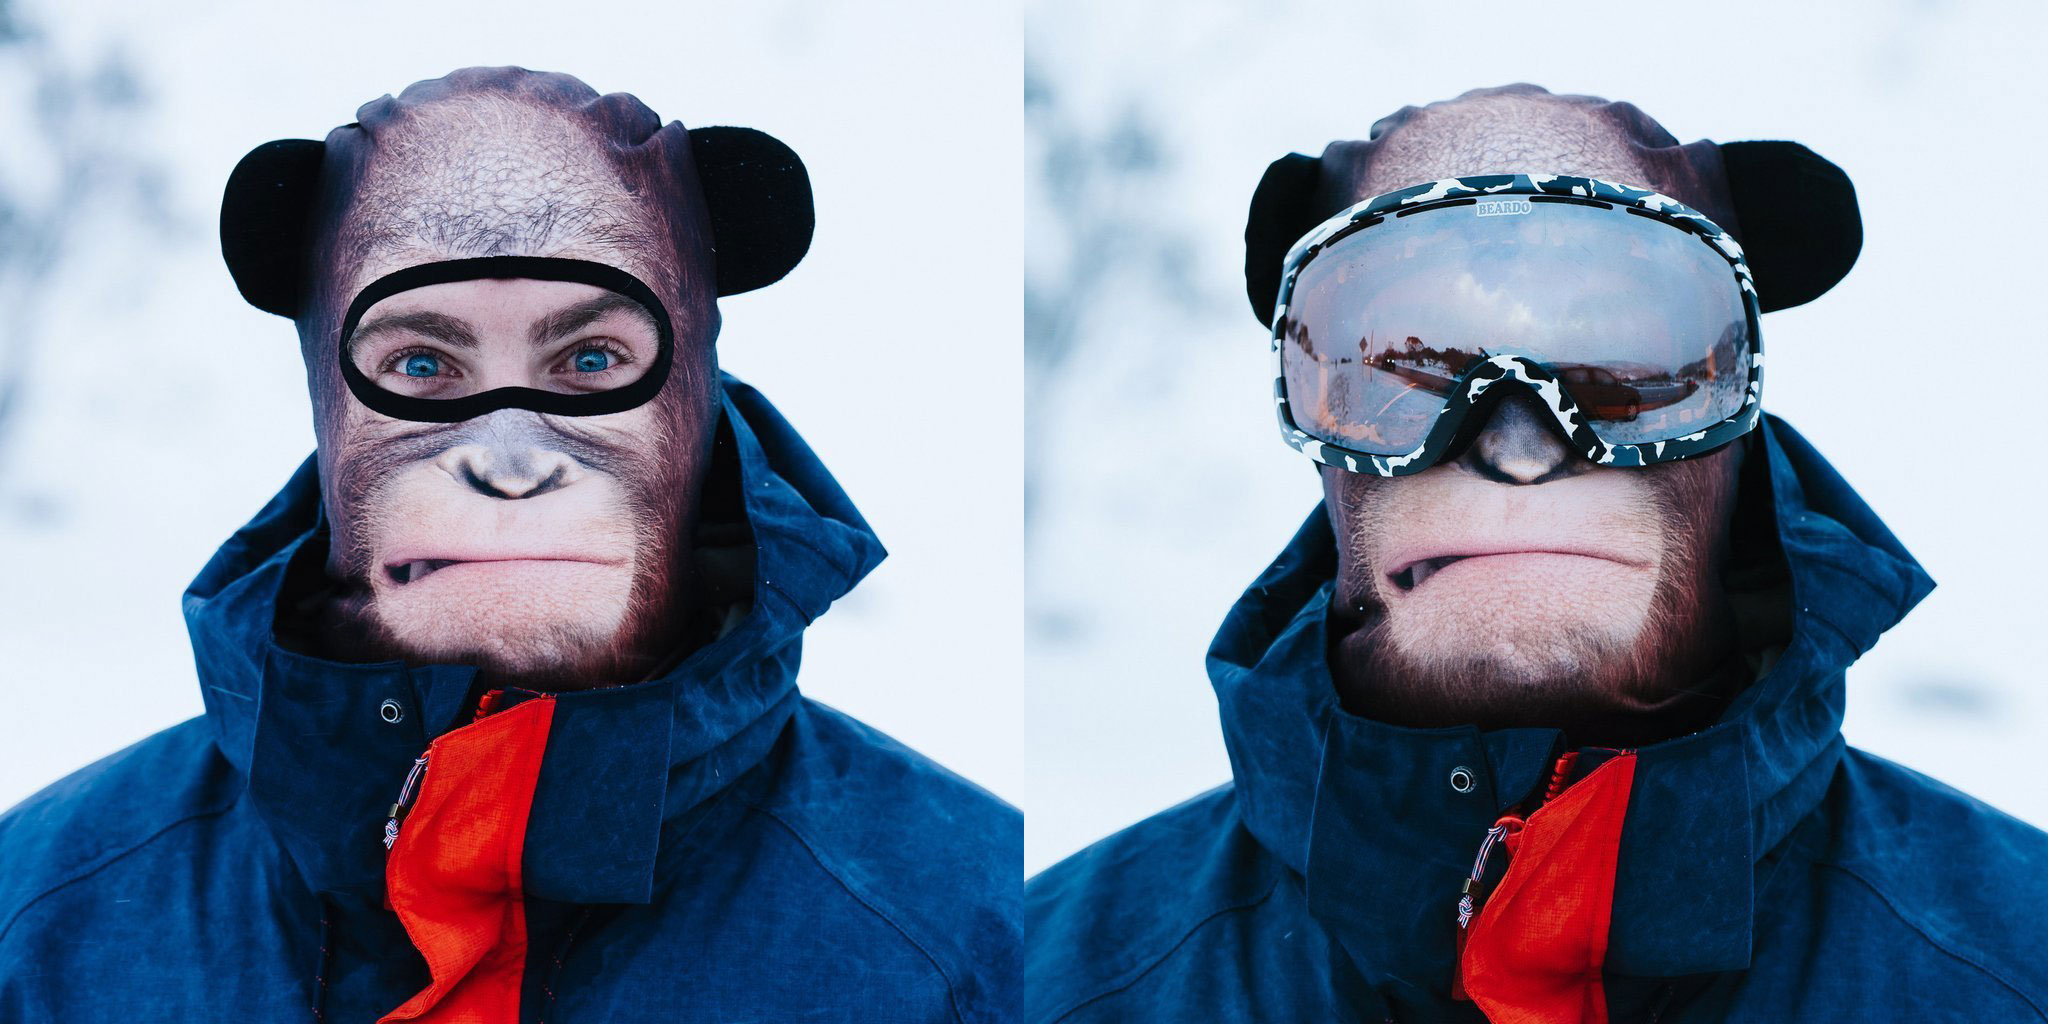 This realistic orangutan ski mask by Beardo, also comes in different animals (fox, red panda, dog, etc.) <br/><br/>It runs about <a href="https://amzn.to/2HssPDN">$37 on Amazon</a>.